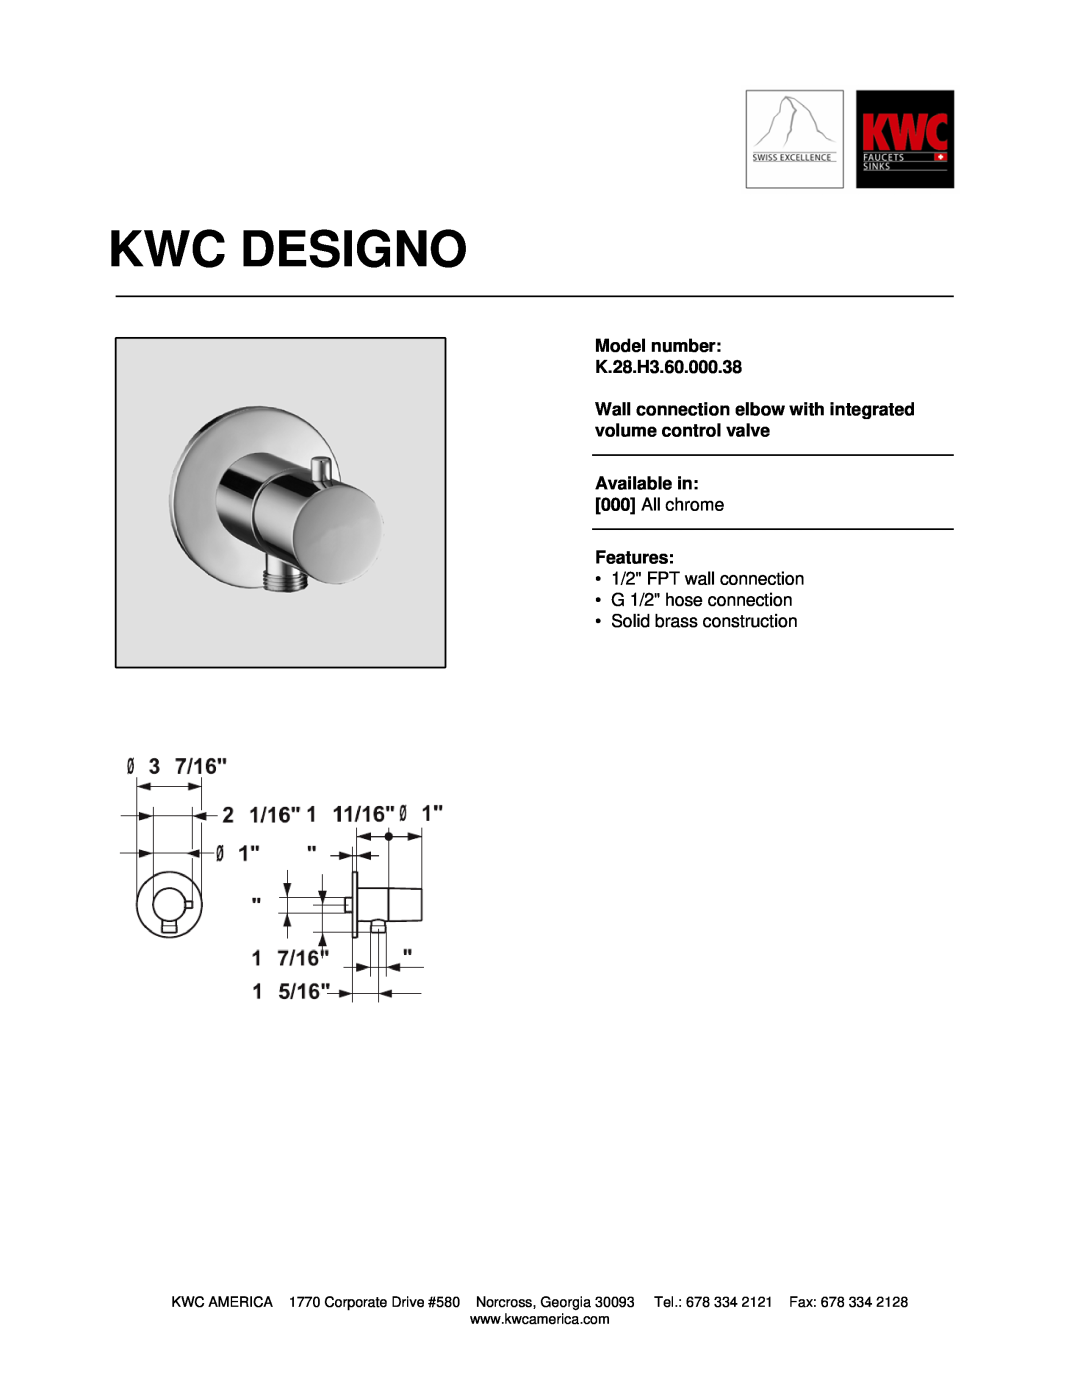 KWC manual Kwc Designo, Model number K.28.H3.60.000.38, Available in: 000 All chrome Features, Solid brass construction 